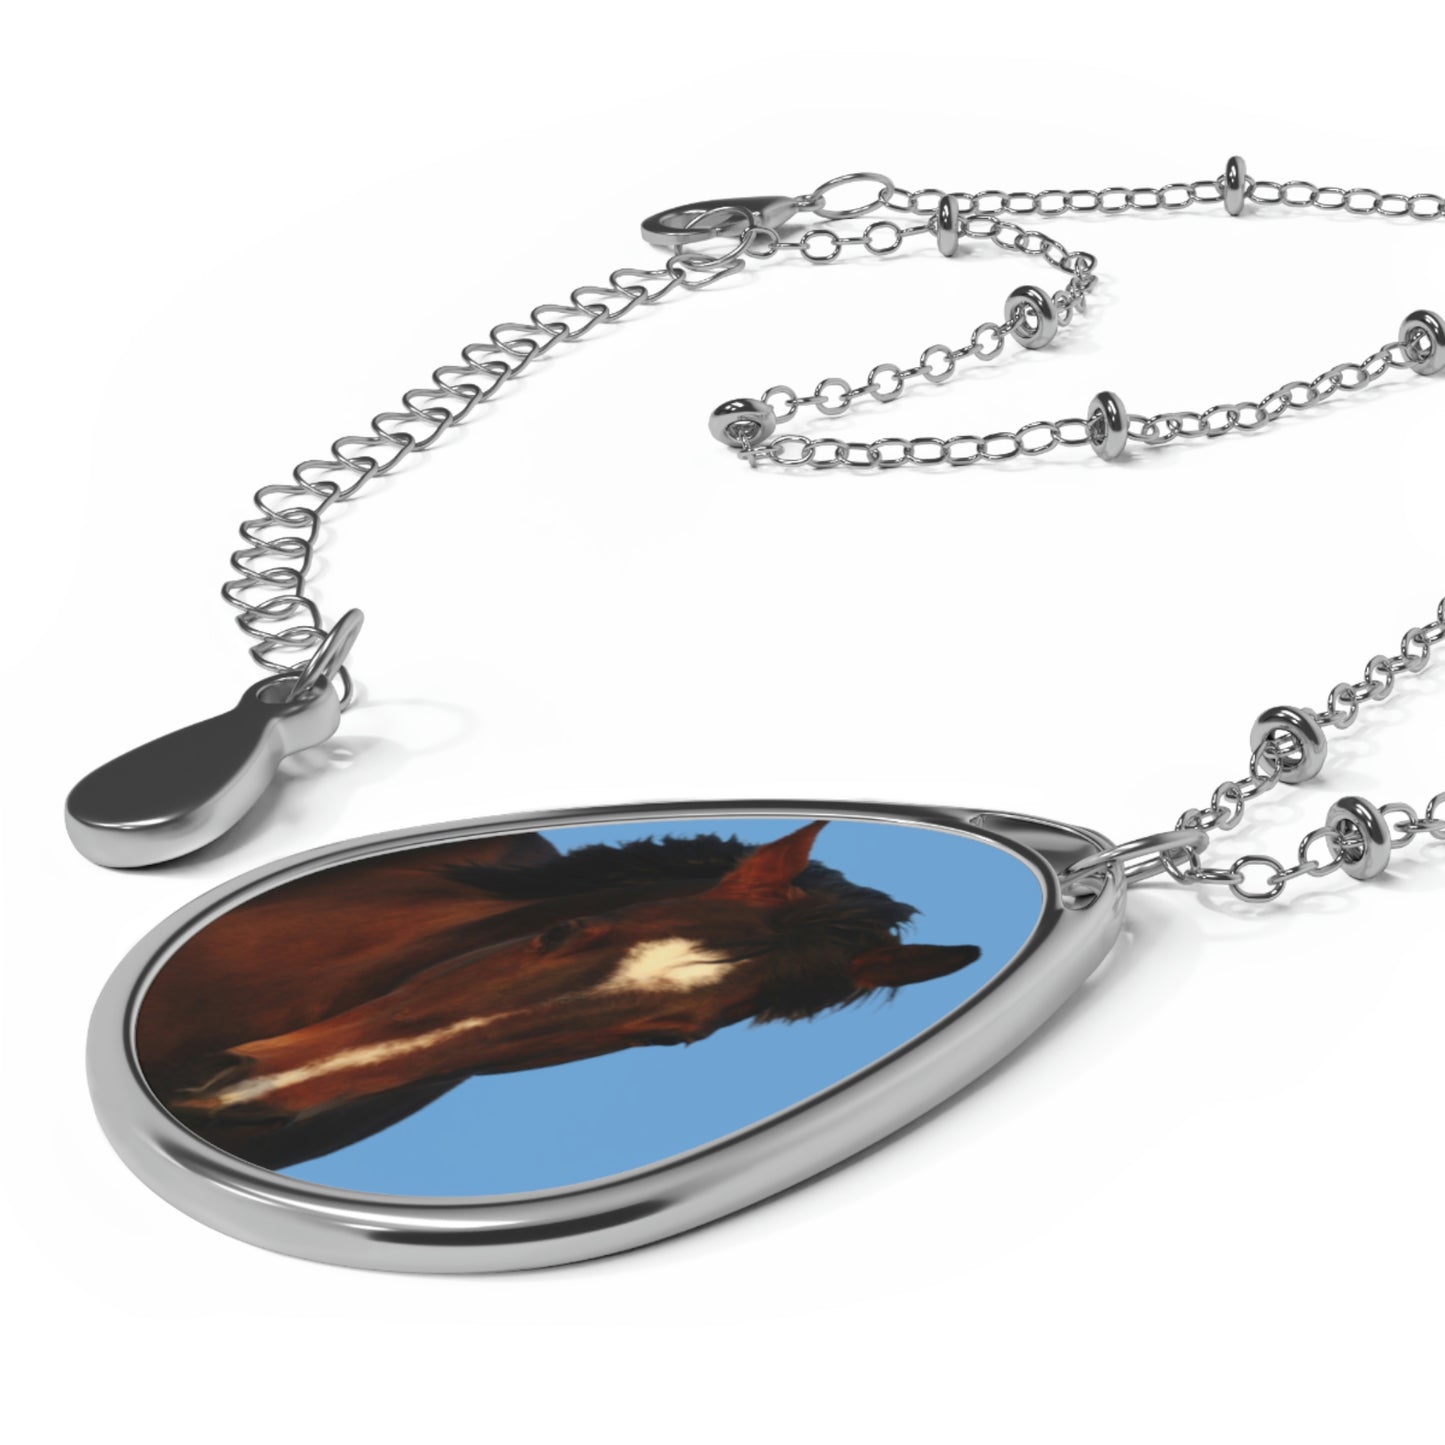 The Heart of a Horse. Quarter Horse   Oval Necklace